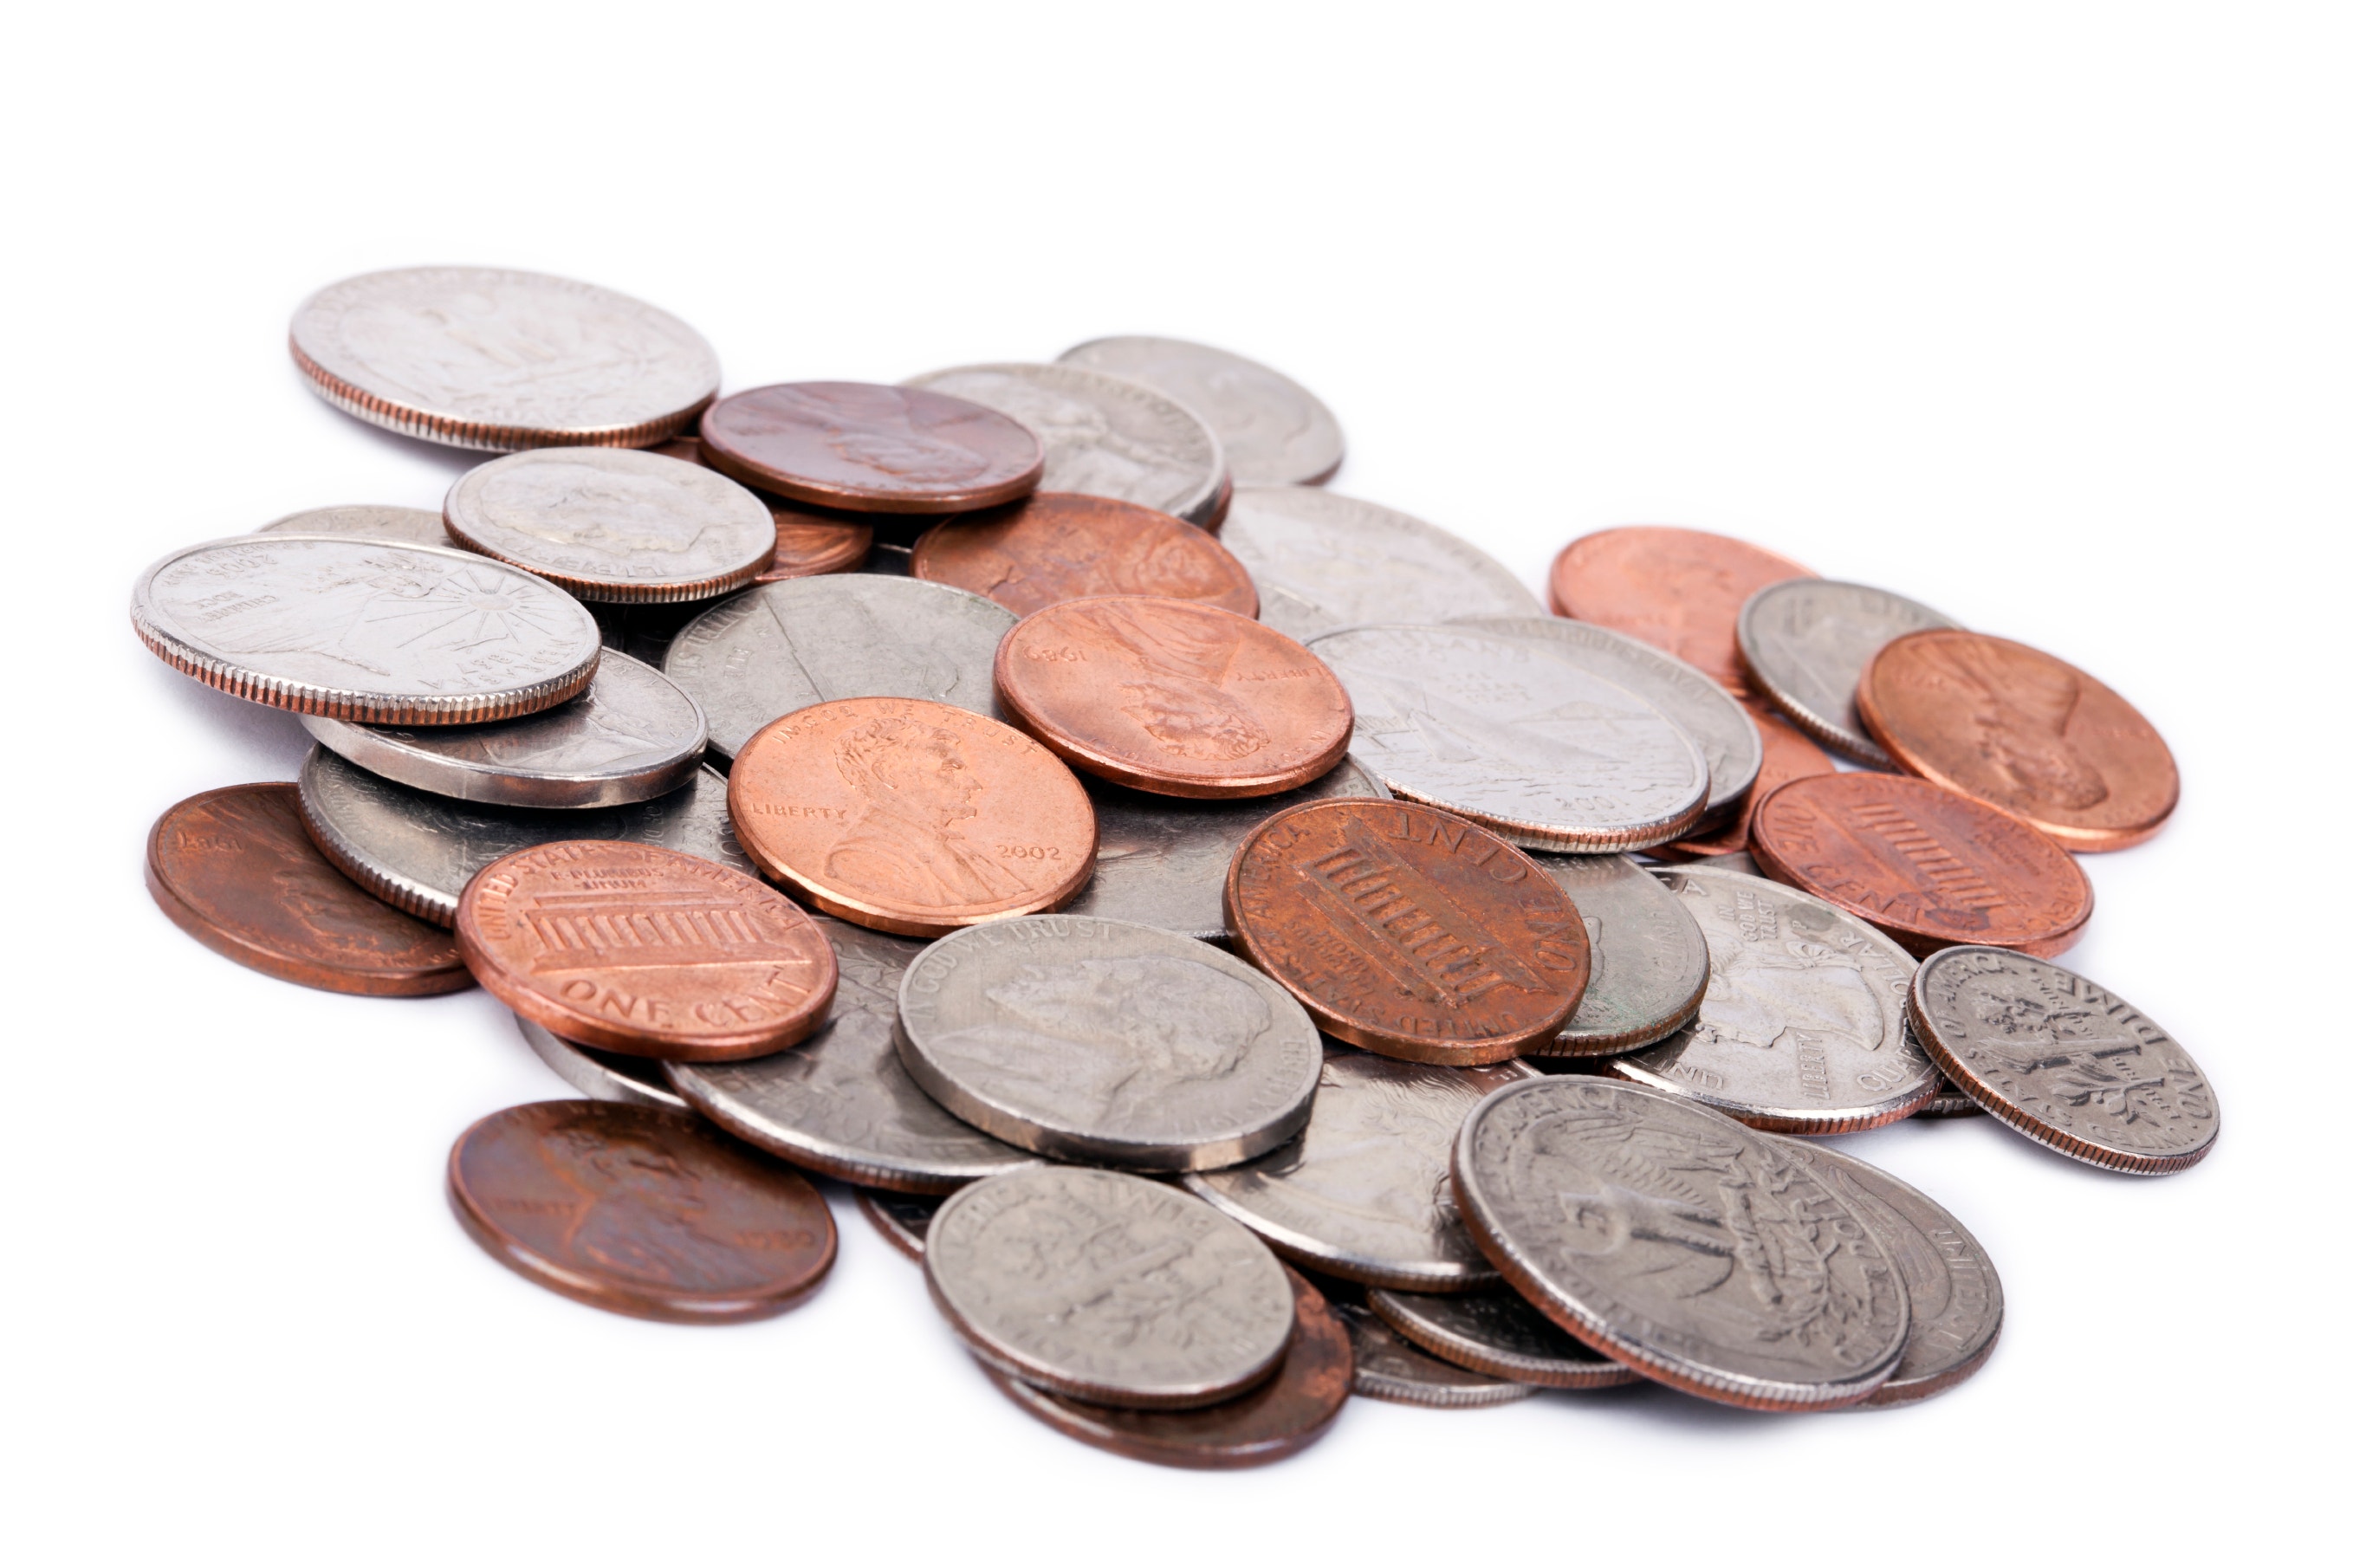 Here's the real reason why you should never pass a penny without picking it up